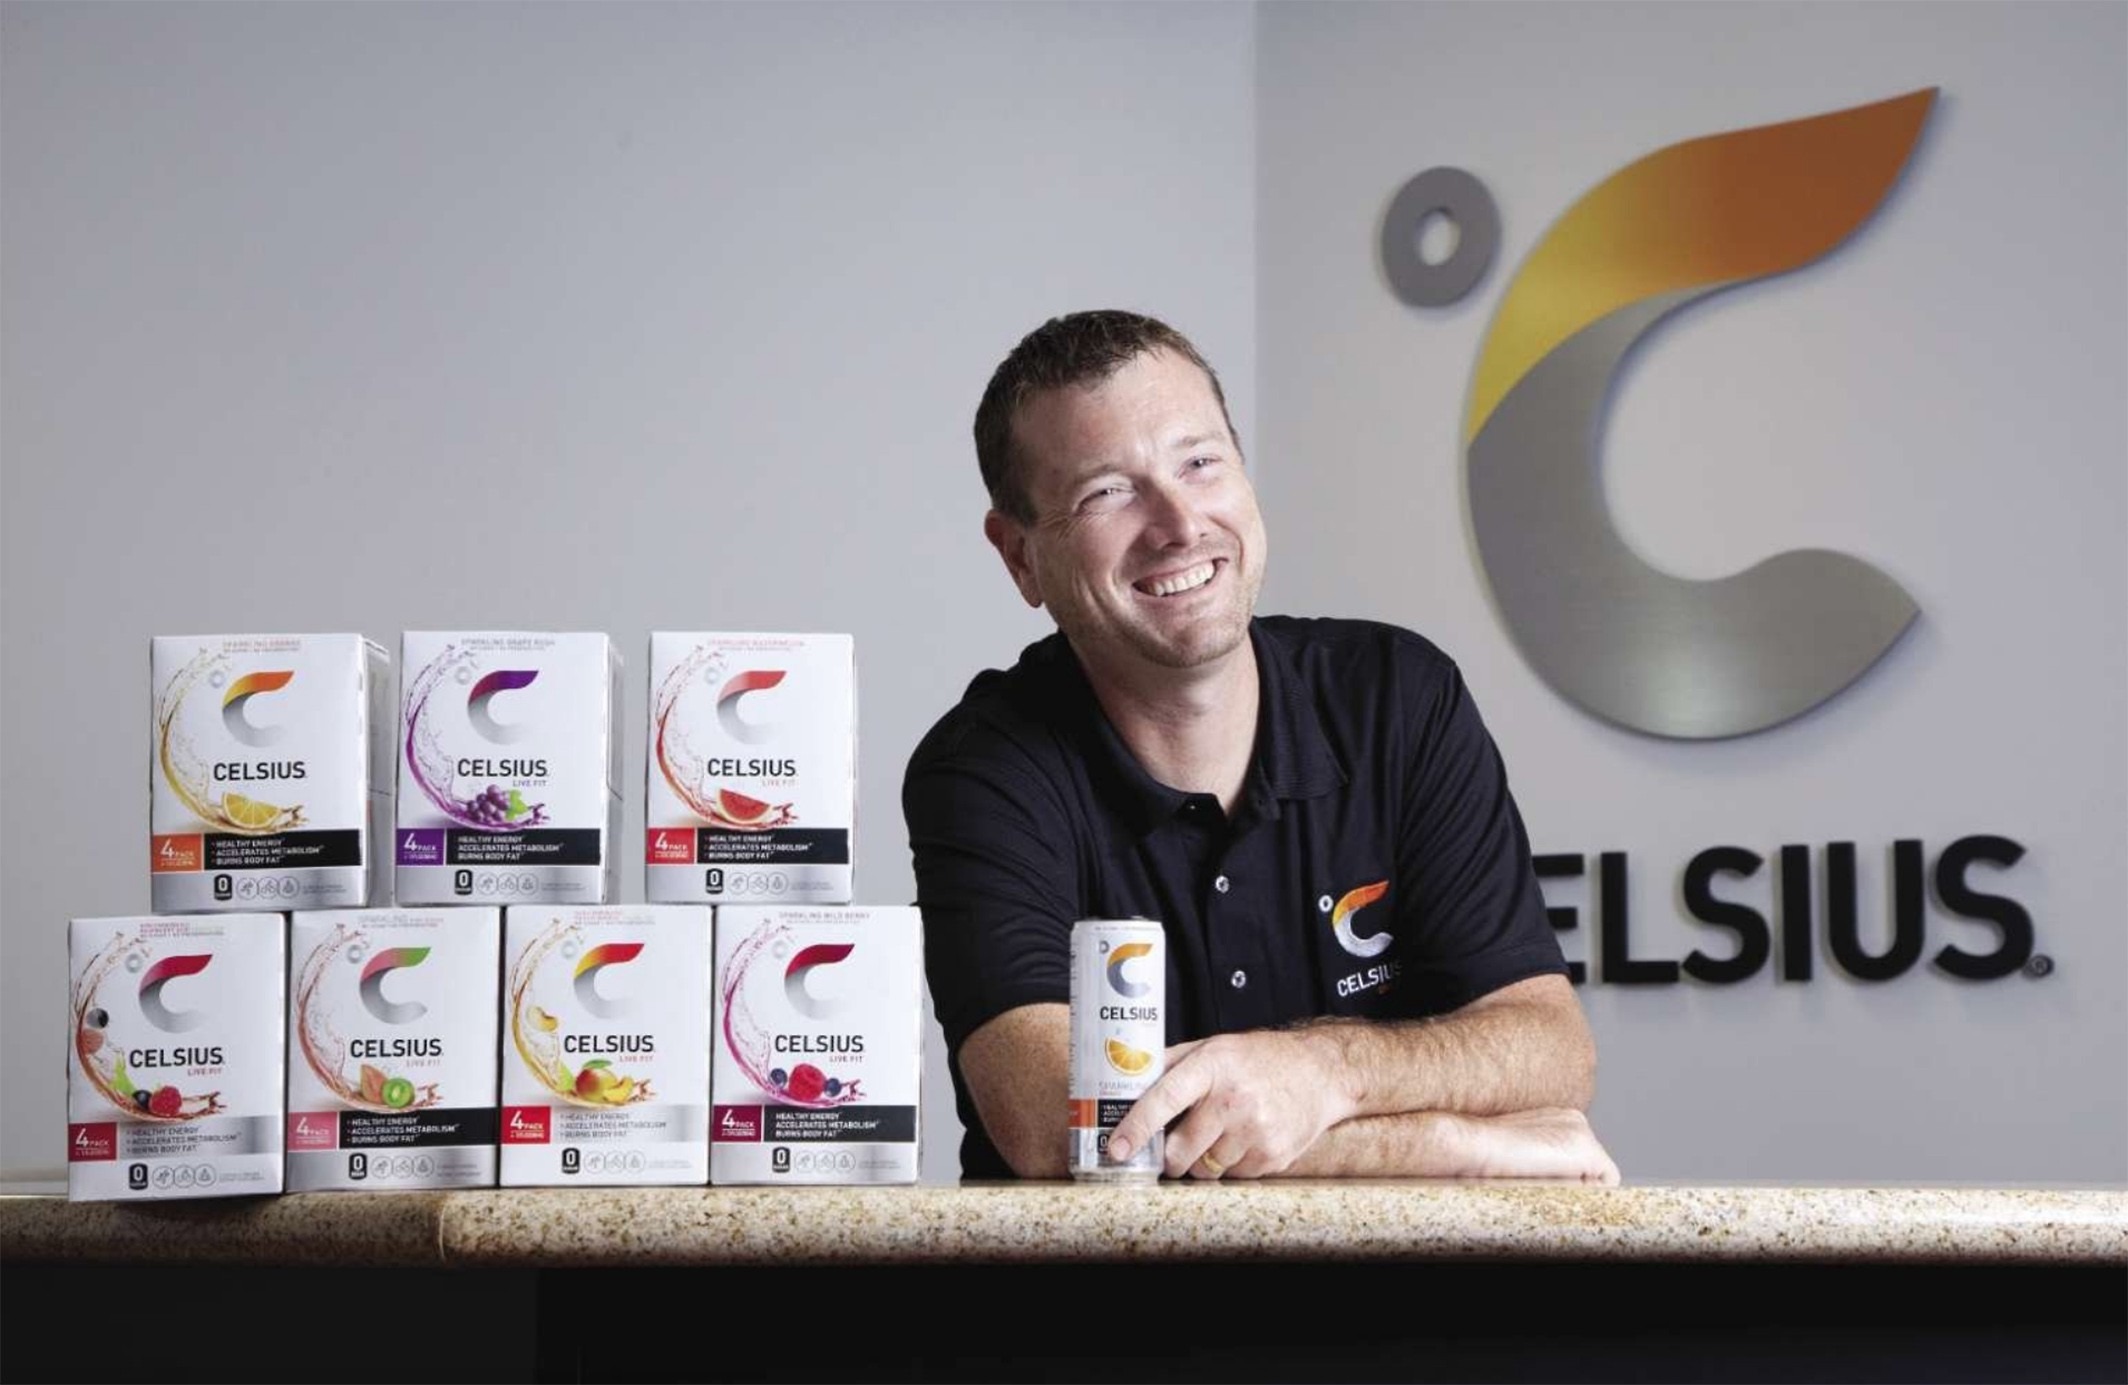 PODCAST | The Importance of Understanding Why Consumers Buy with John Fieldly, CEO of Celsius Holdings Inc.